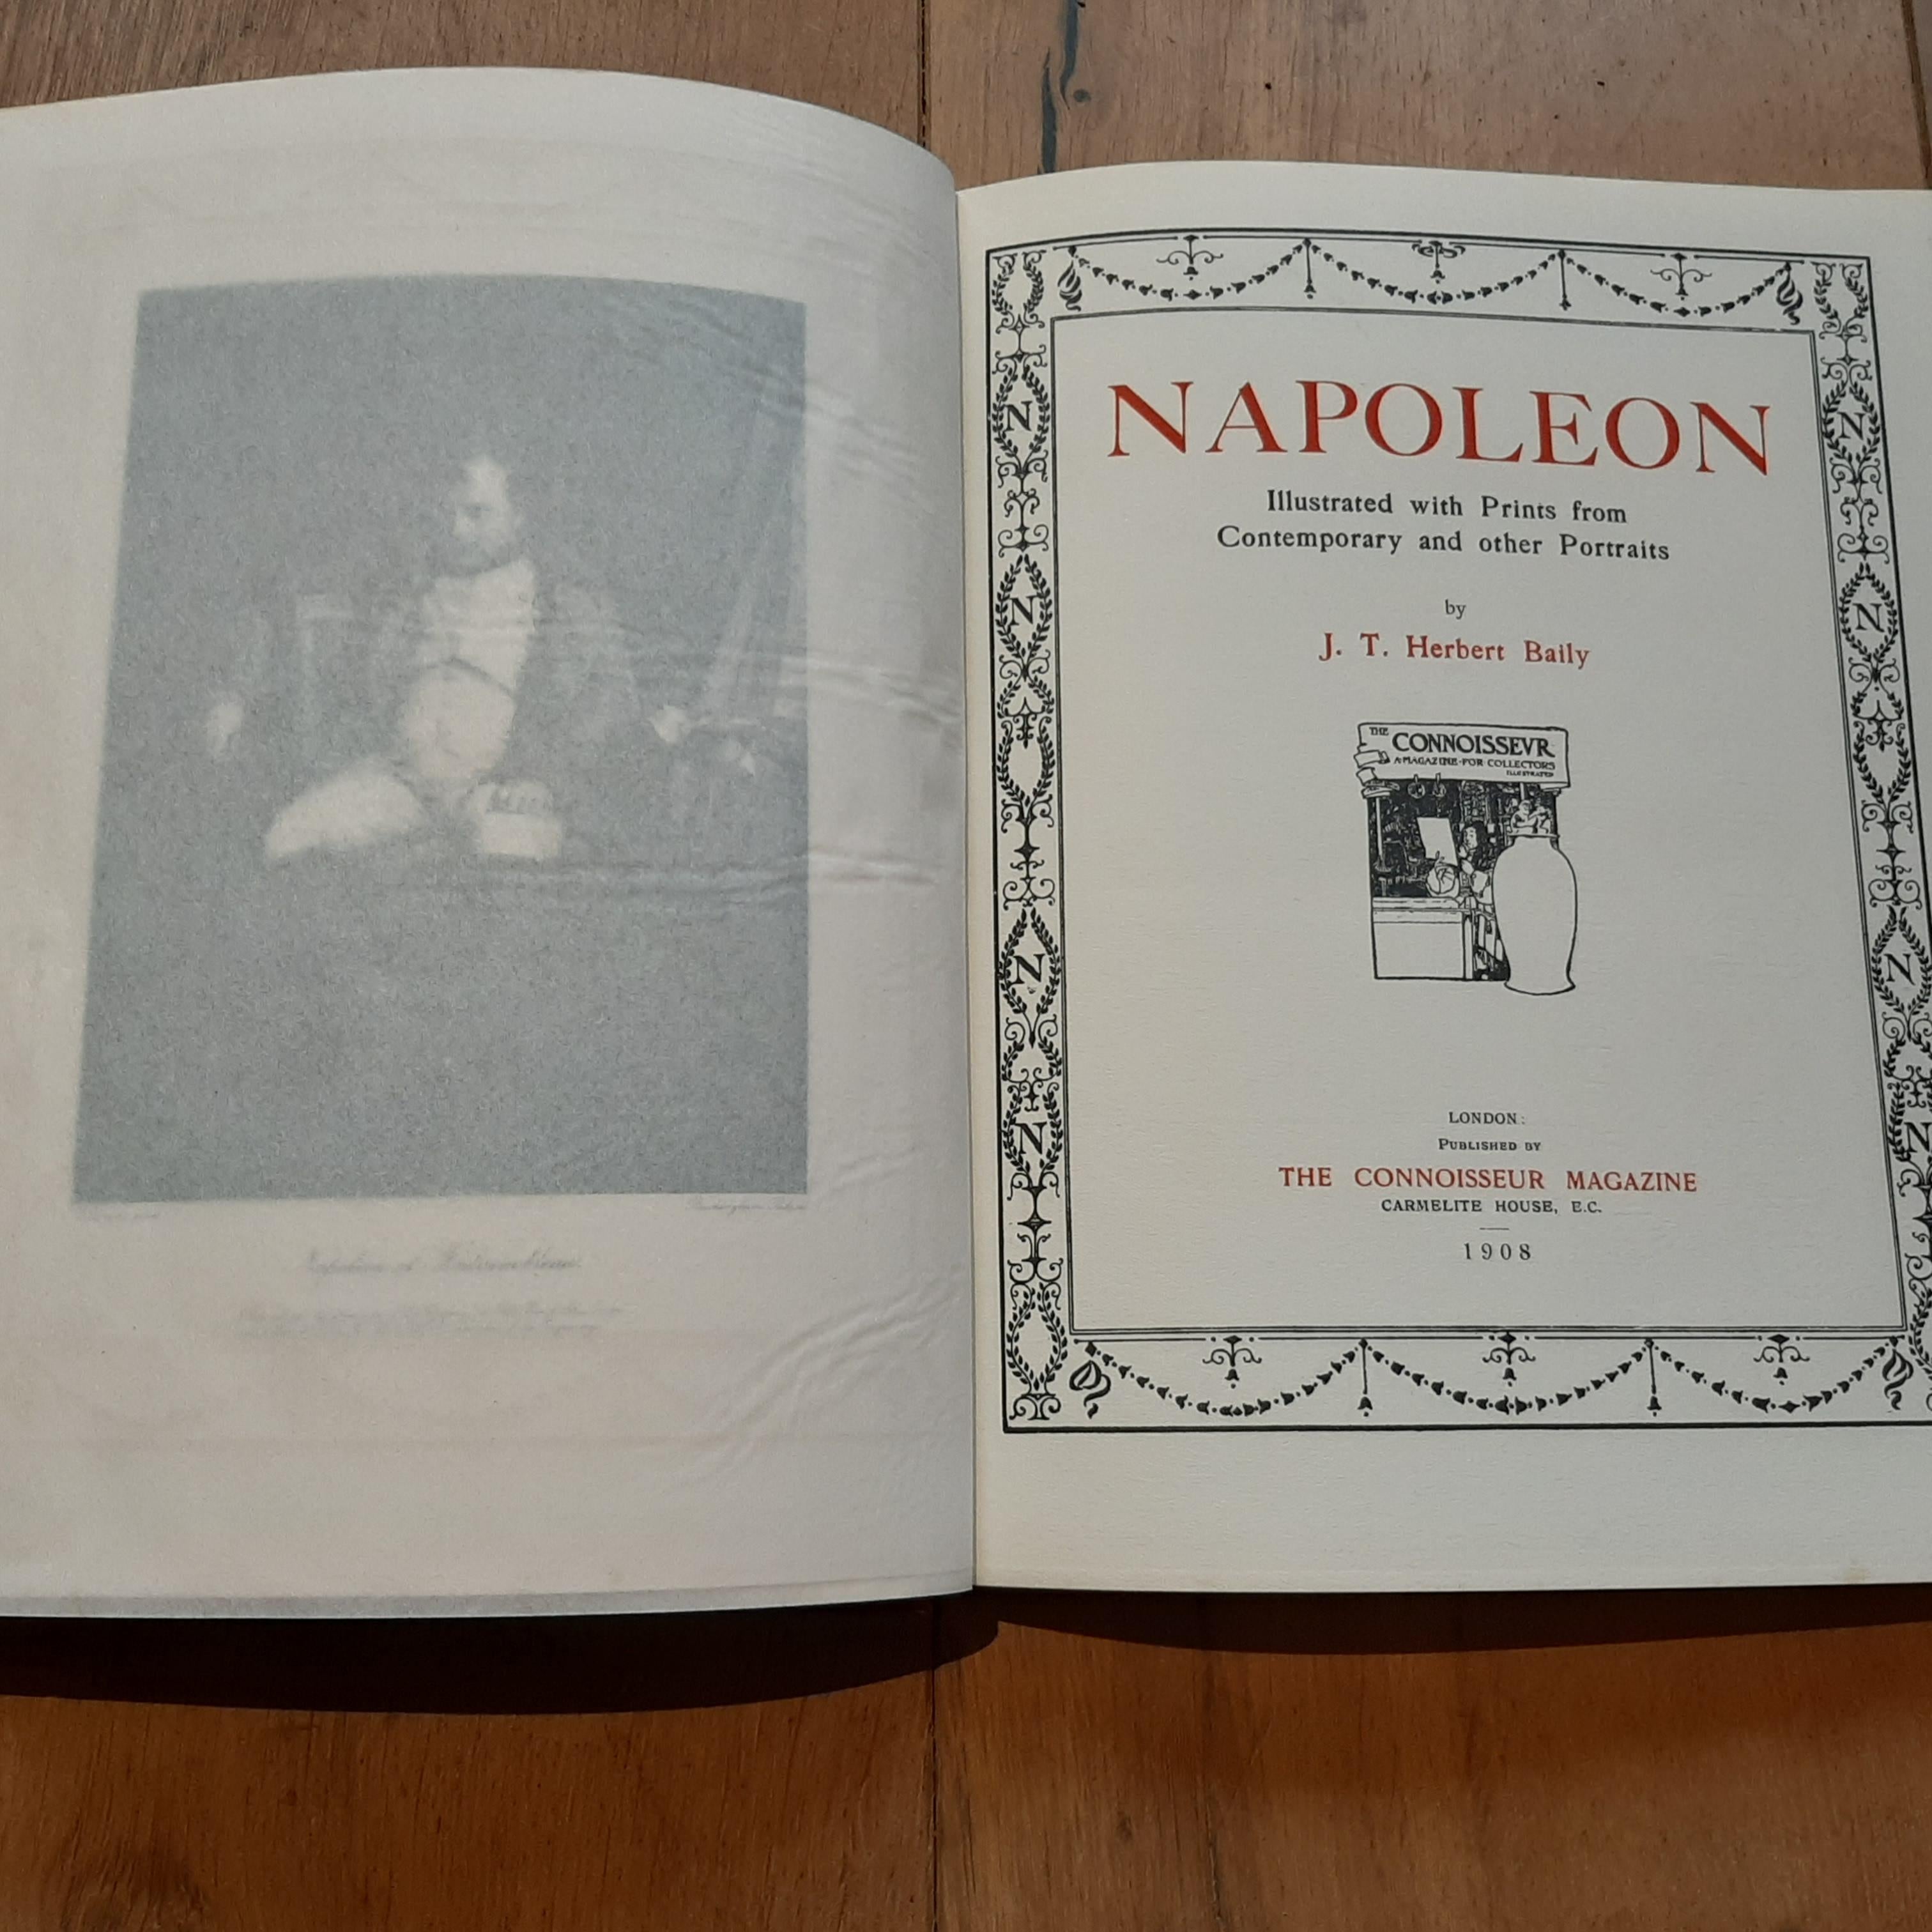 'Napoleon, Illustrated with Prints from Contemporary and other Portraits' by J.T. Herbert Baily. 126,(2) pp. illustrated, steel engraving frontispiece, 14 illustrations added to the text, of which 12 in color and 38 illustrations in the back of the